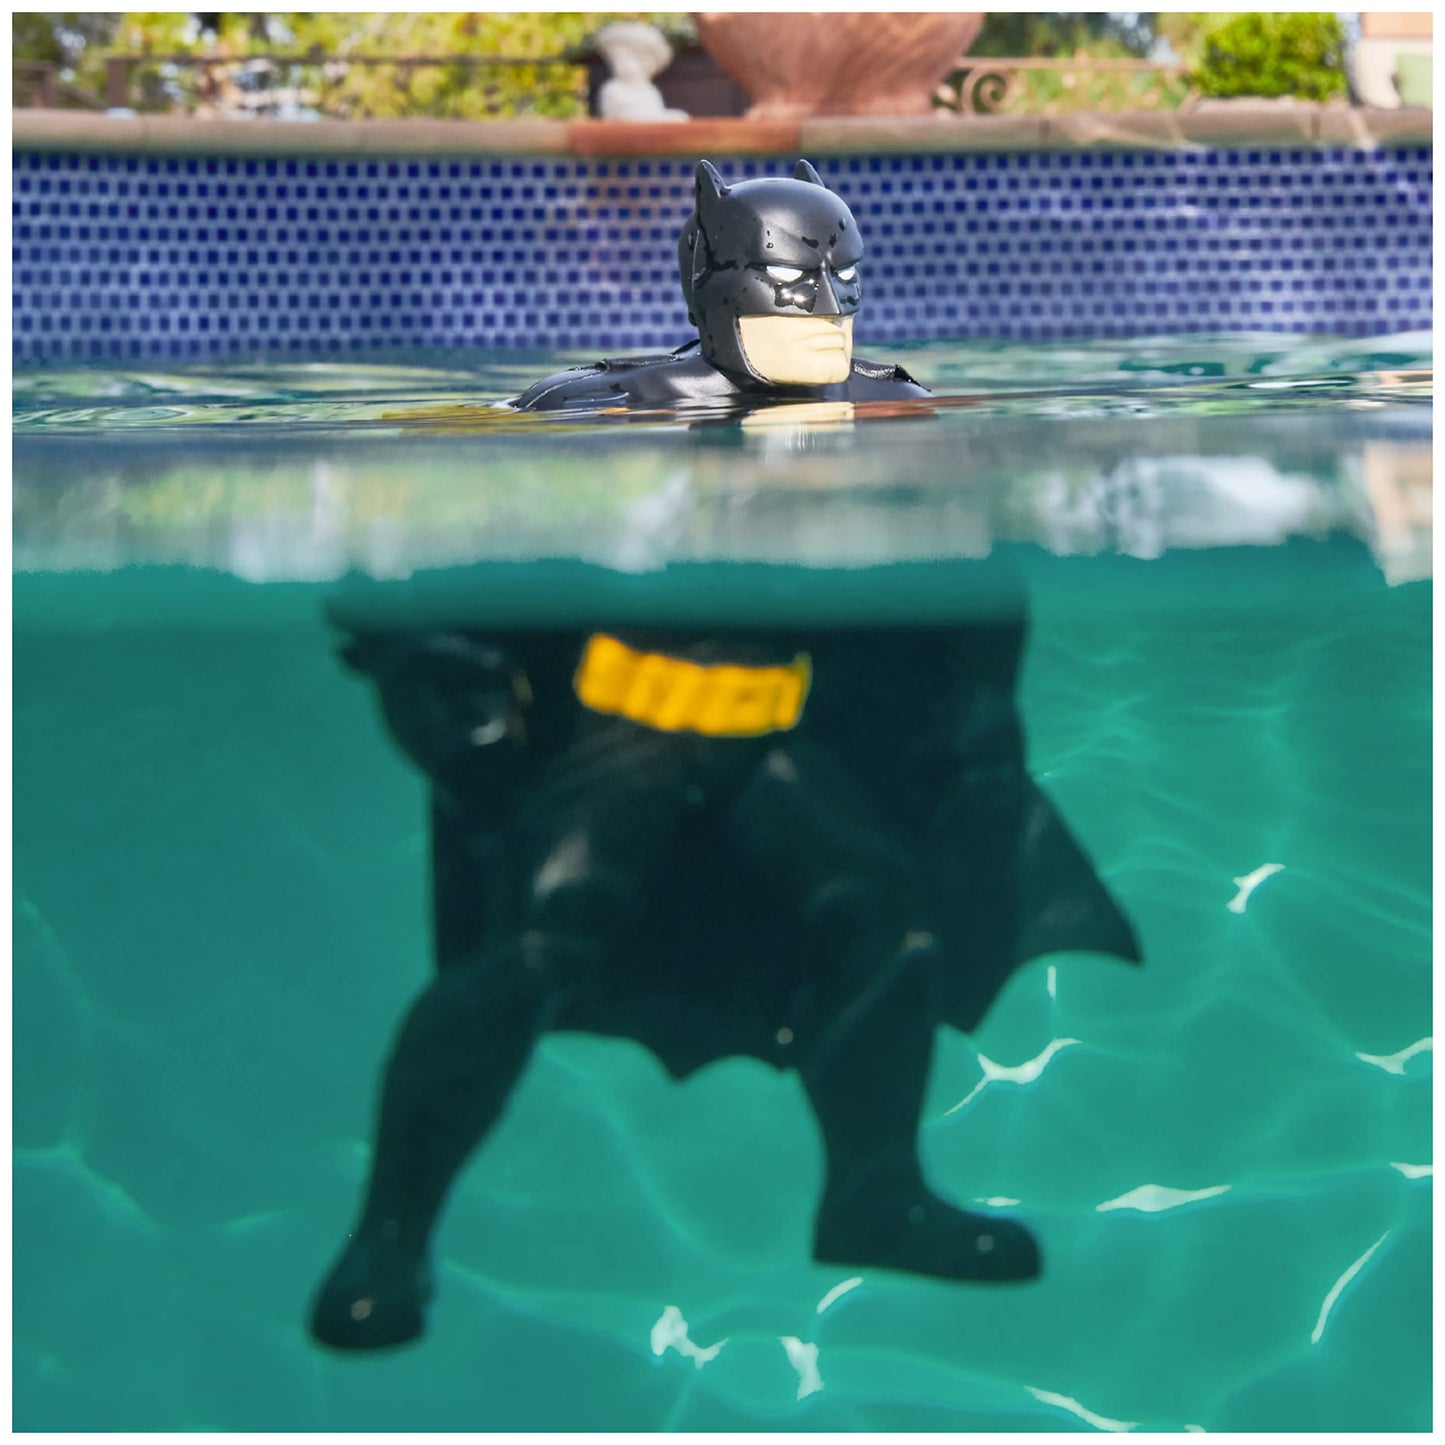 Swimways DC Batman Floatin' Figures, Swimming Pool Accessories & Kids Pool Toys, Batman Party Supplies & Water Toys for Kids Aged 3 & Up